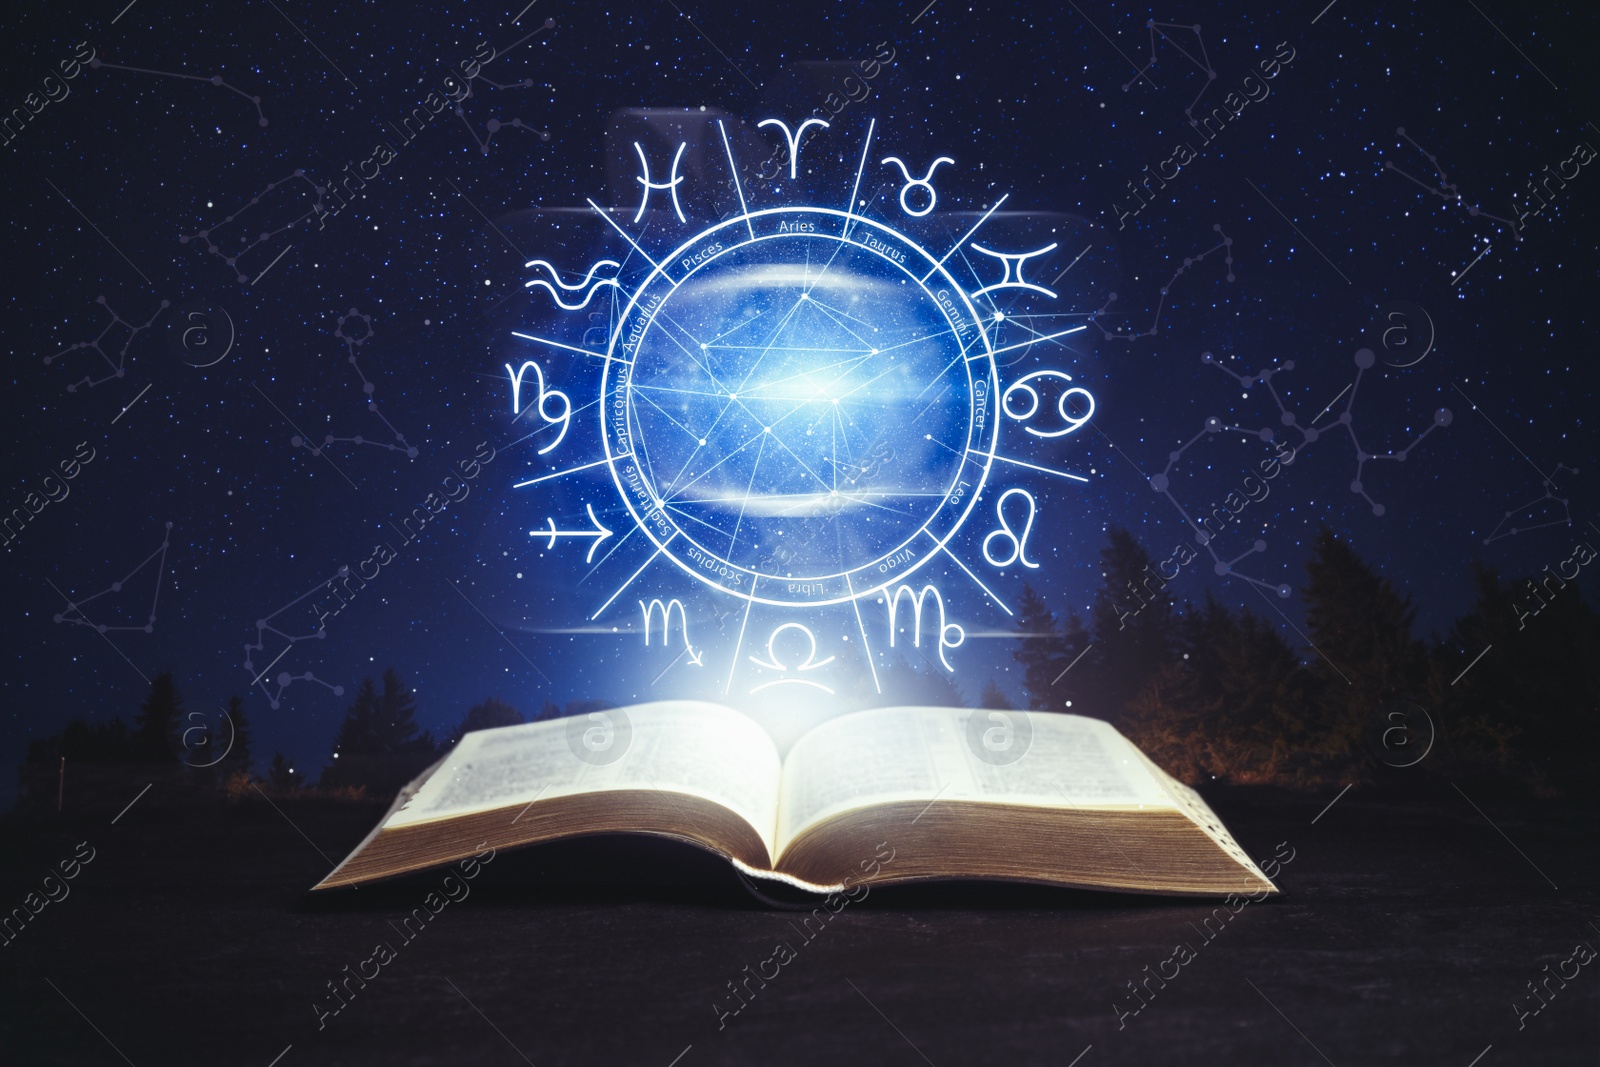 Image of Old book on black surface and illustration of zodiac wheel with astrological signs under starry sky at night